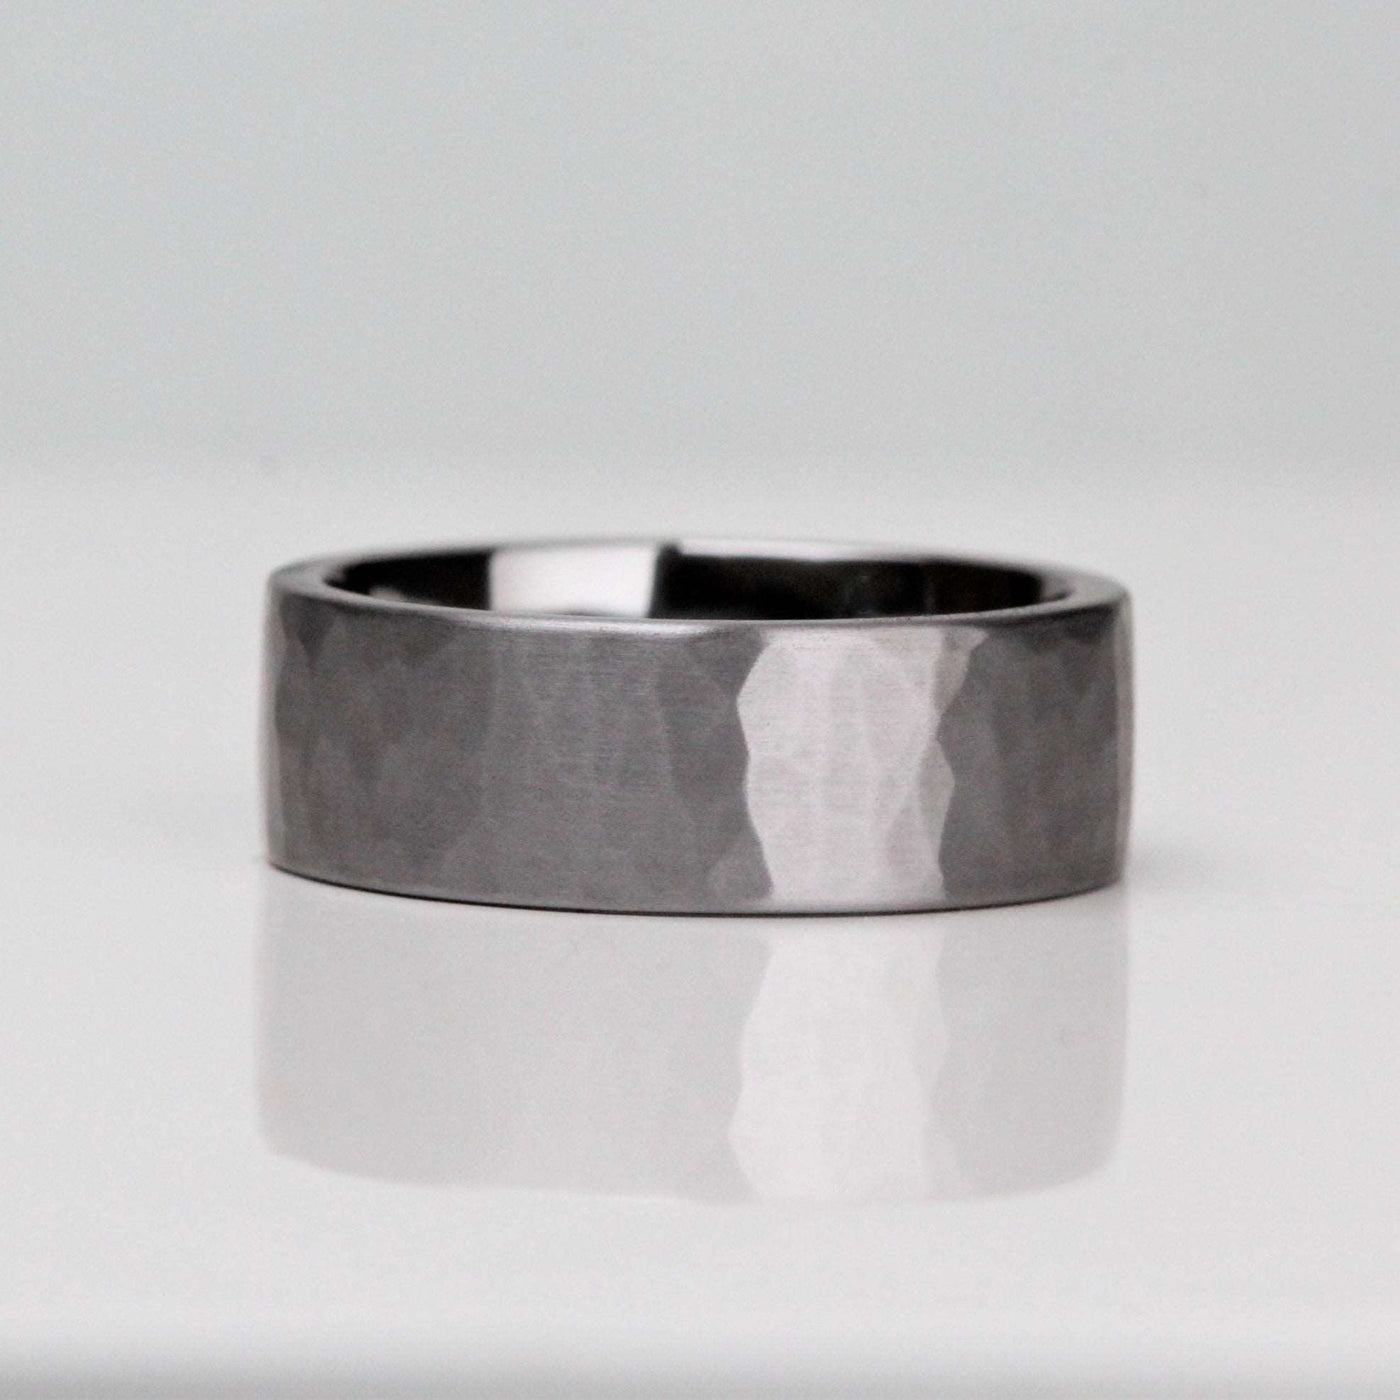 A mans Tantalum wedding ring. Gunmetal grey in 7mm width with a hammered and brushed/matt finish